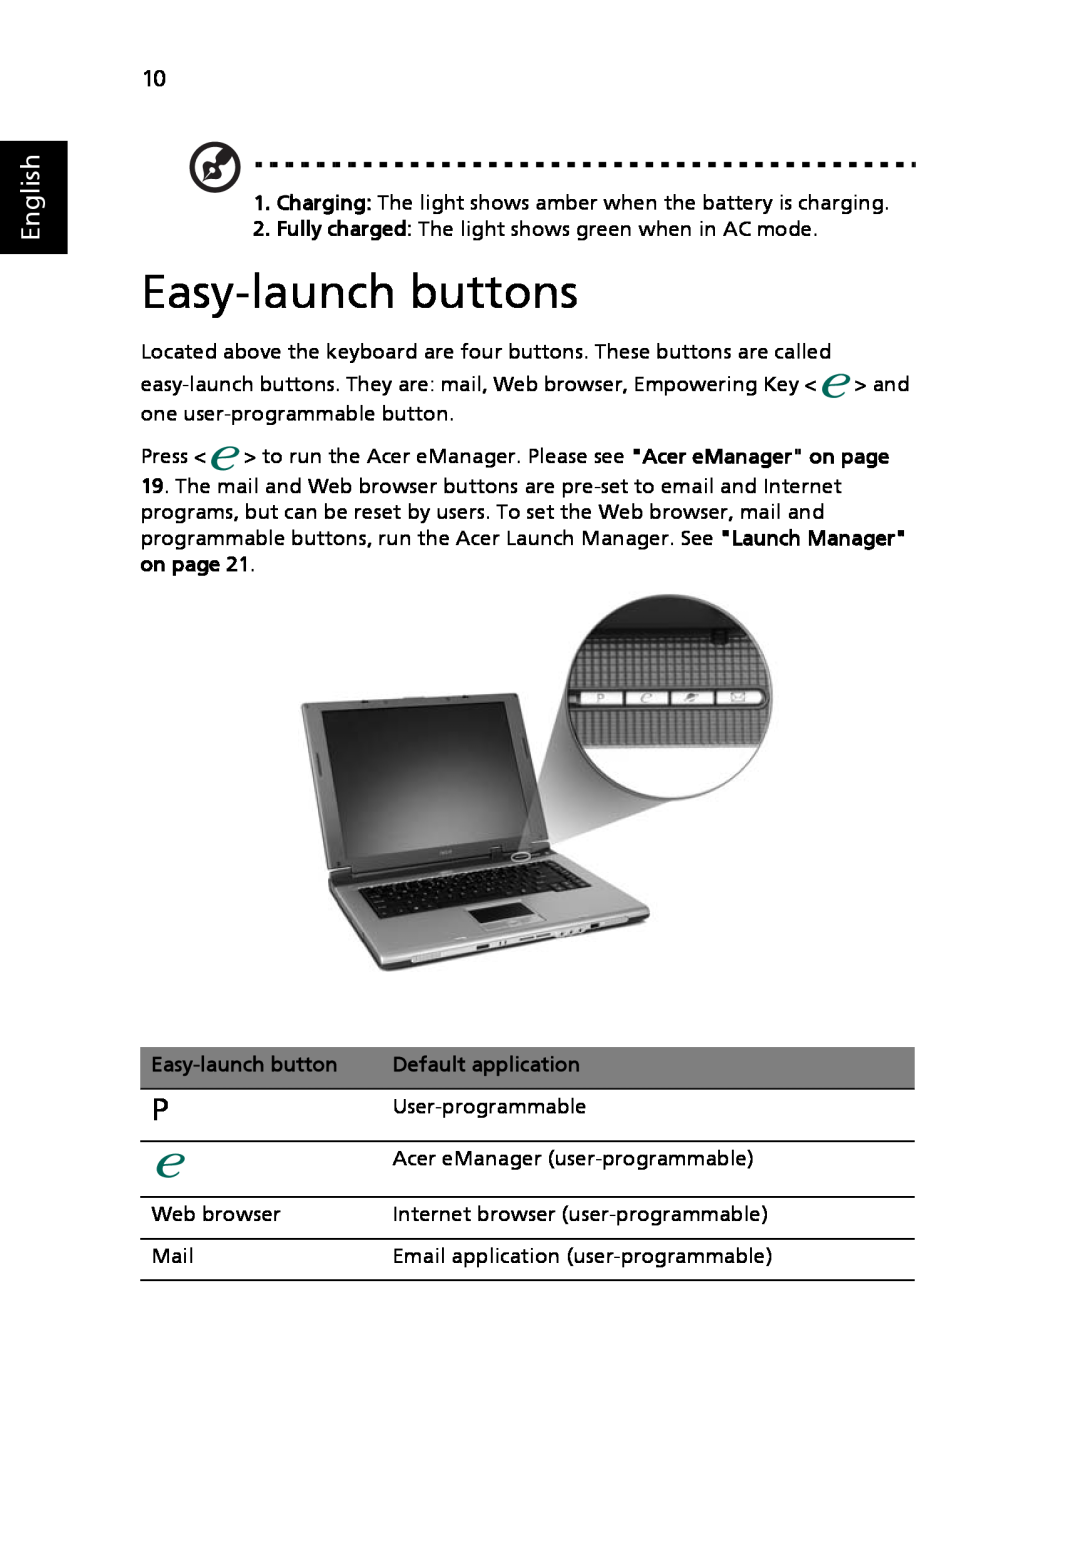 Acer 3630 manual Easy-launch buttons, English 